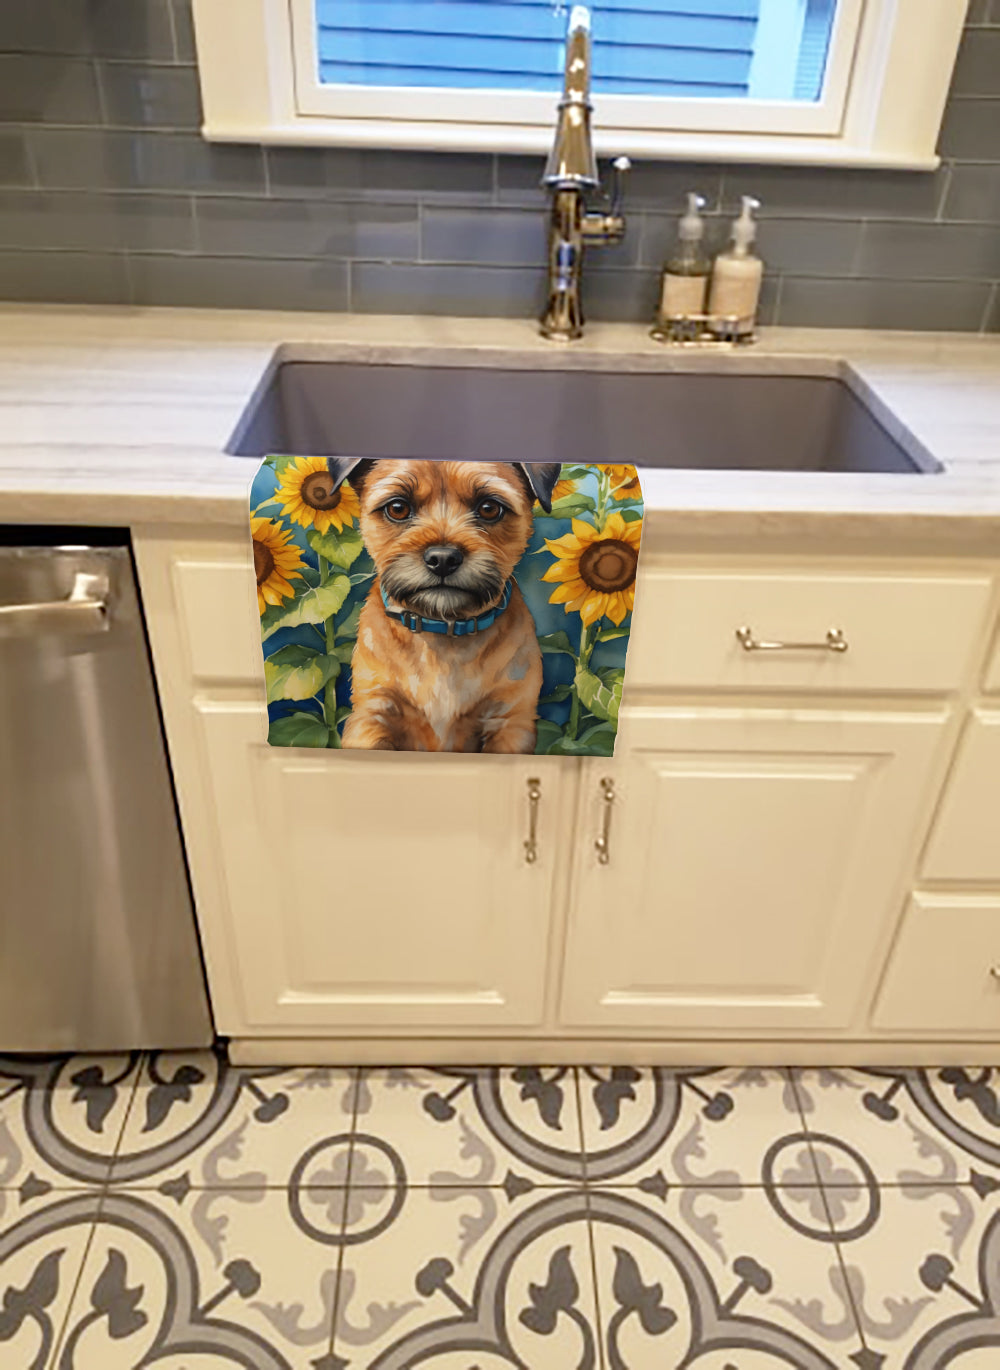 Buy this Border Terrier in Sunflowers Kitchen Towel